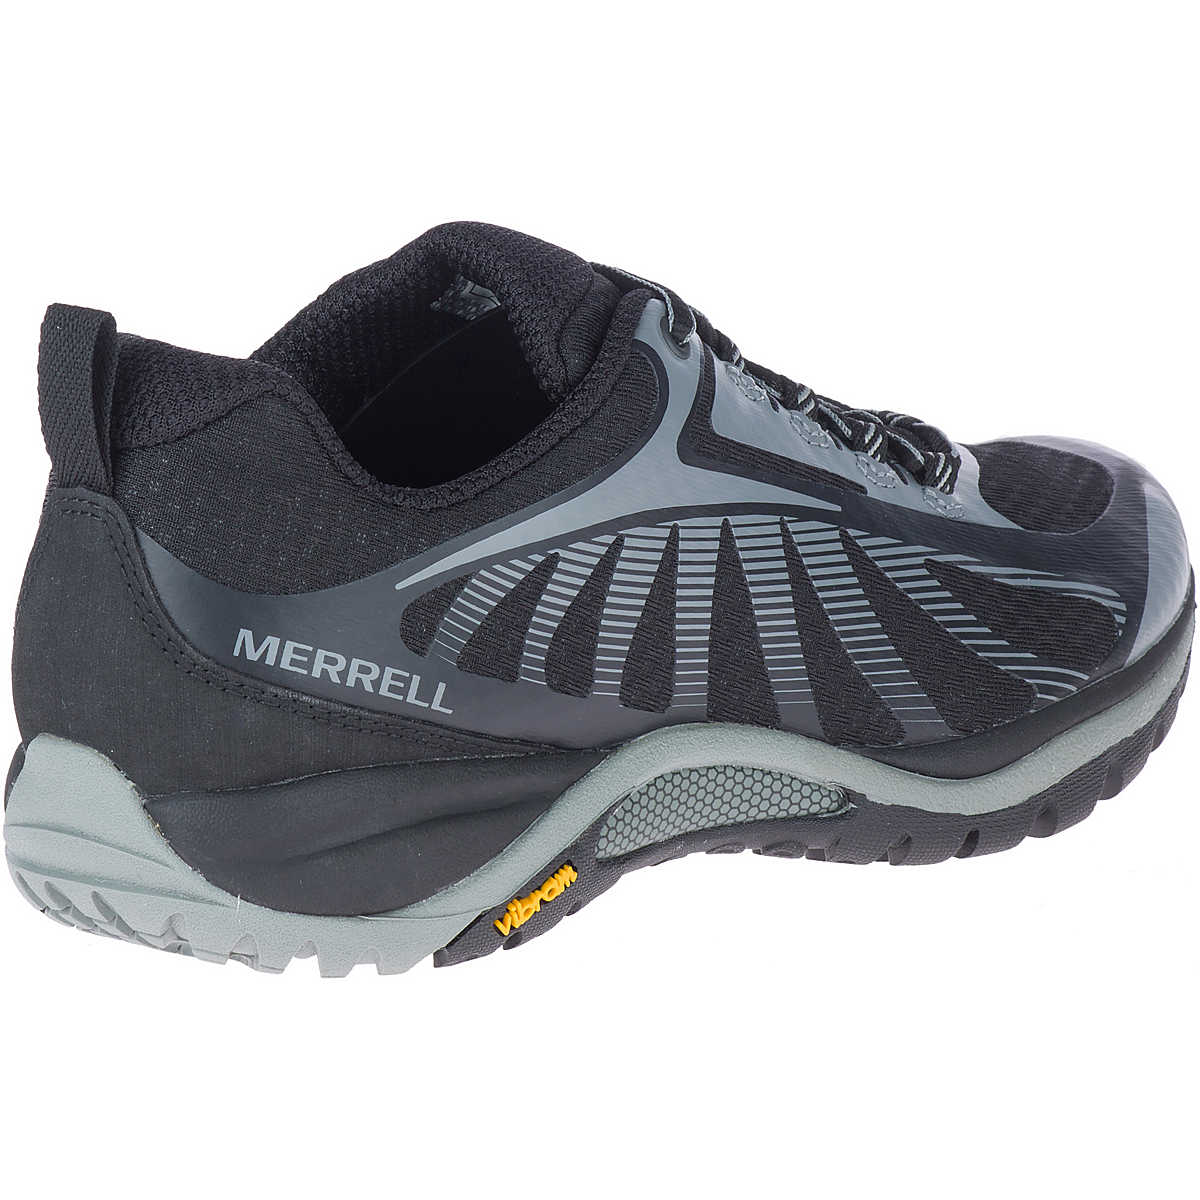 Vibram® TC5+ Outsole - Provides exceptional traction on various surfaces.